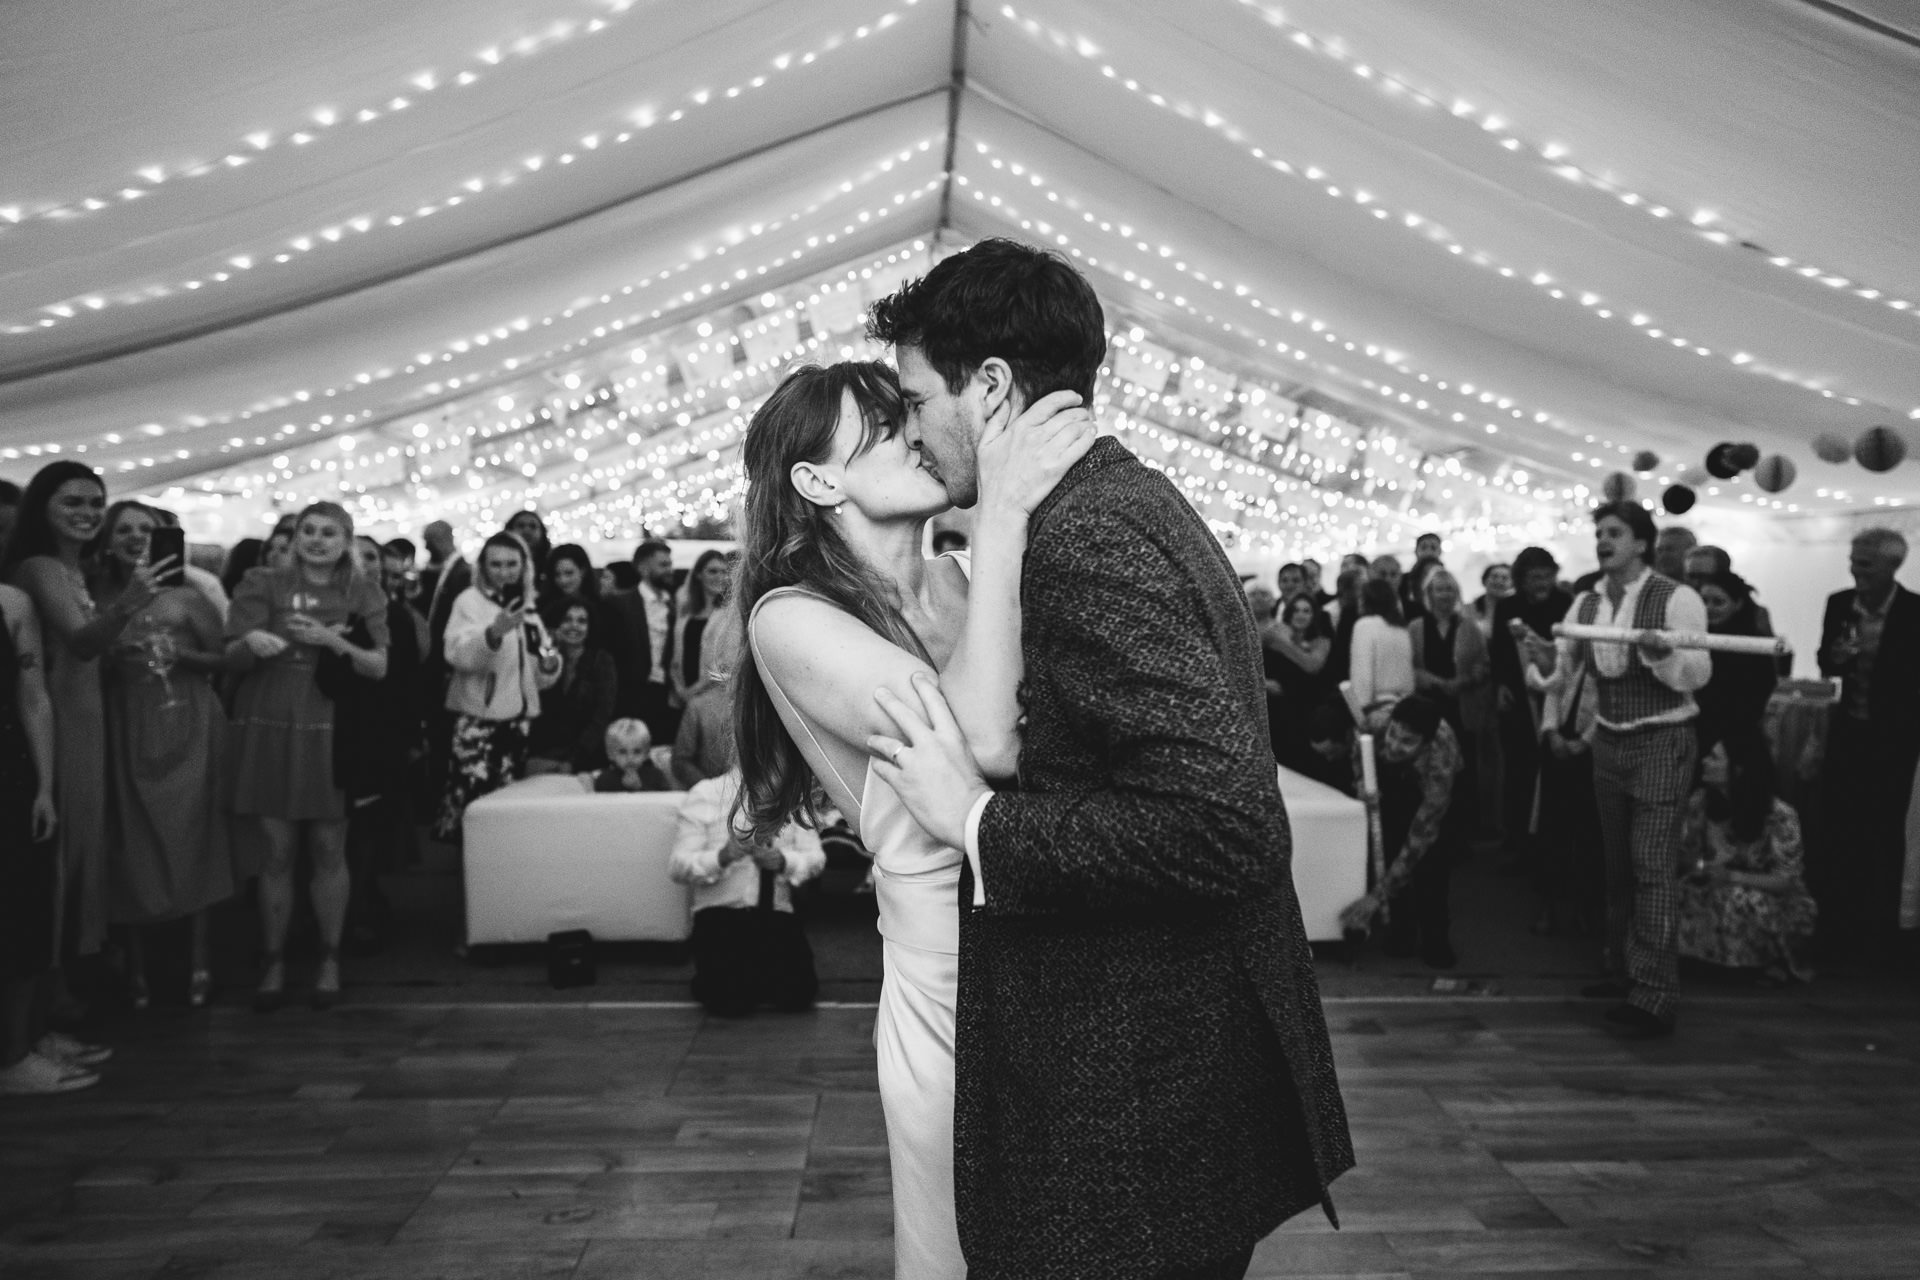 Bride and groom kissing during their first dance with wedding guests watching in a marquee